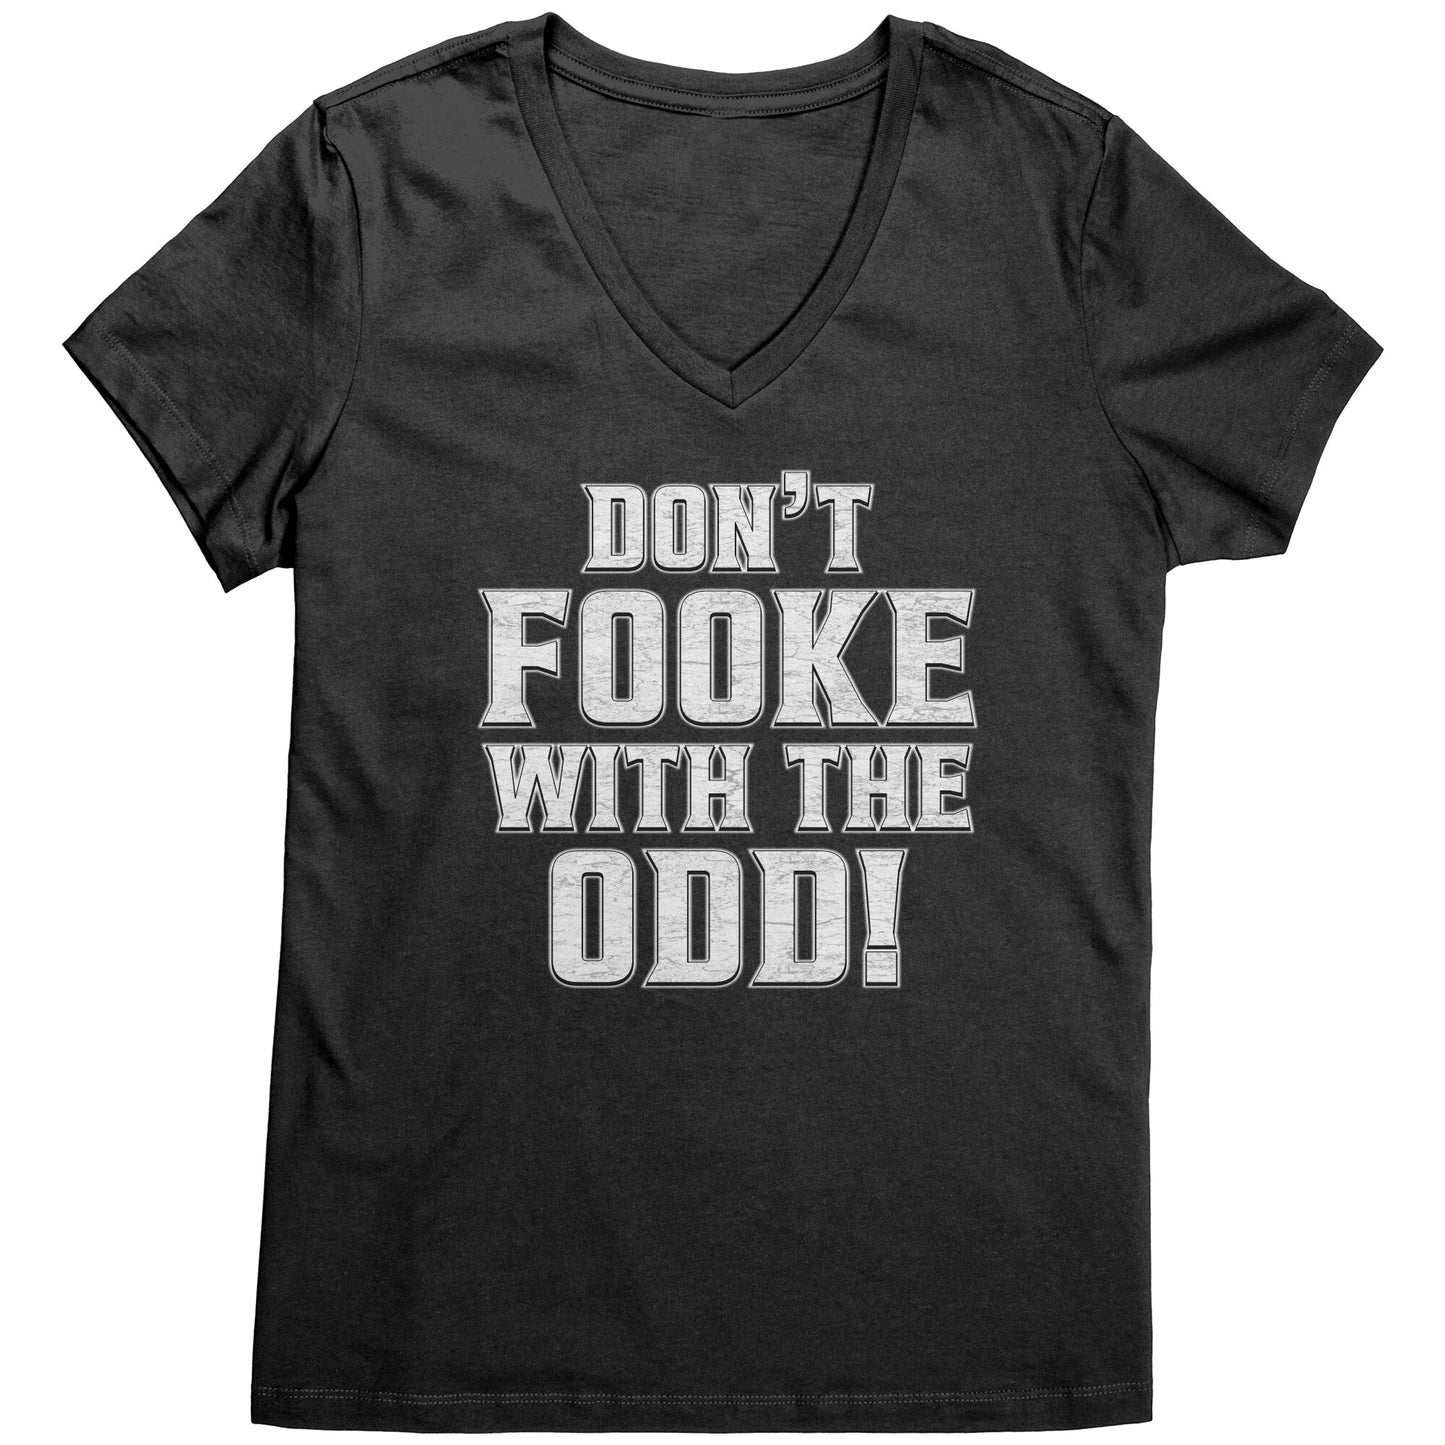 Don't Fooke With The Odd! Women's Dark-Colored V-Neck Tee